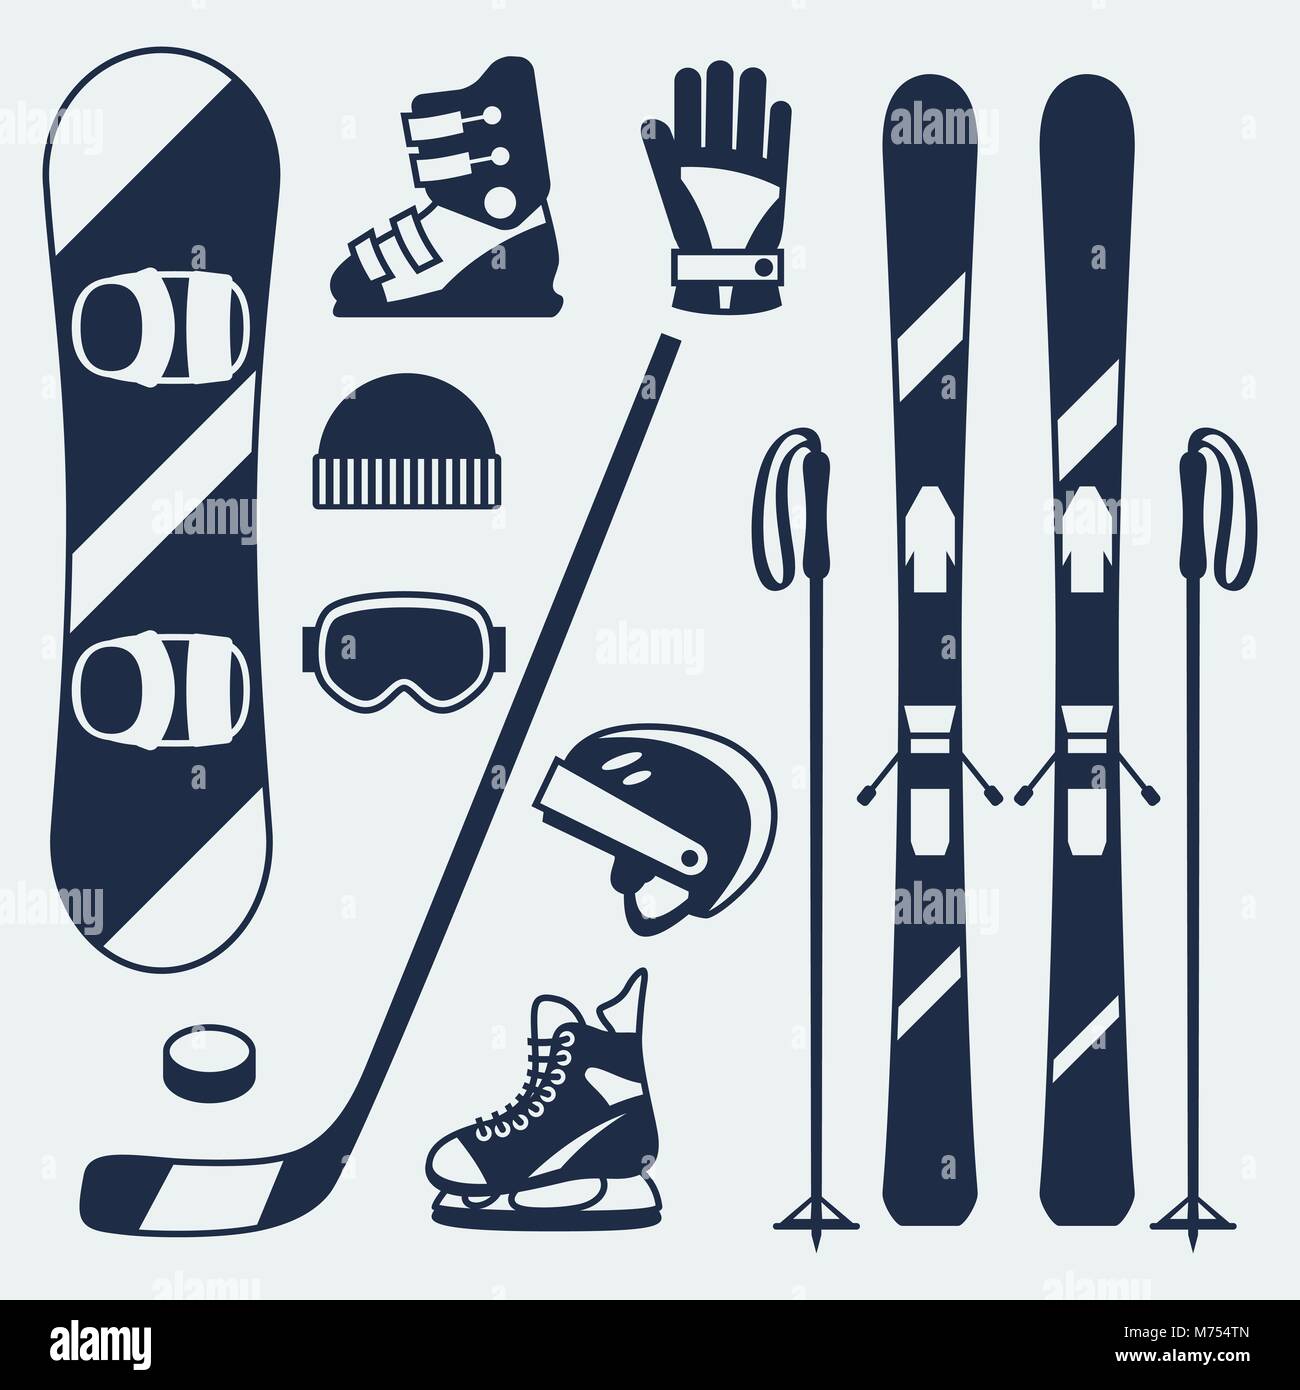 Winter sports equipment icons set in flat design style Stock Vector